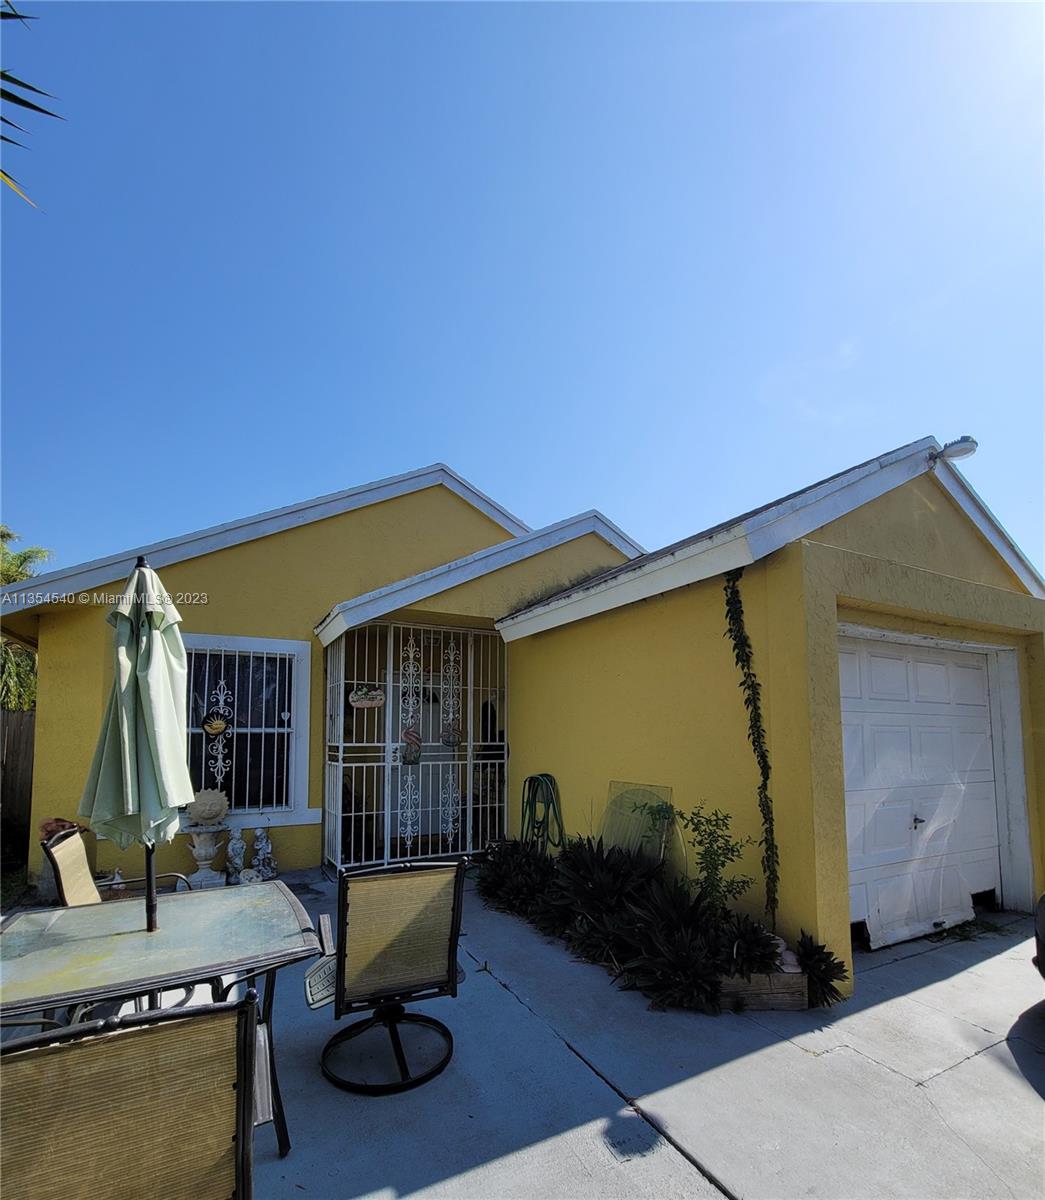 Excellent opportunity to own a single family home. Nice three bedroom two bath with a one car garage, community is gated, has a pool and a low association. Seller is motived to sell. Bring your offers!